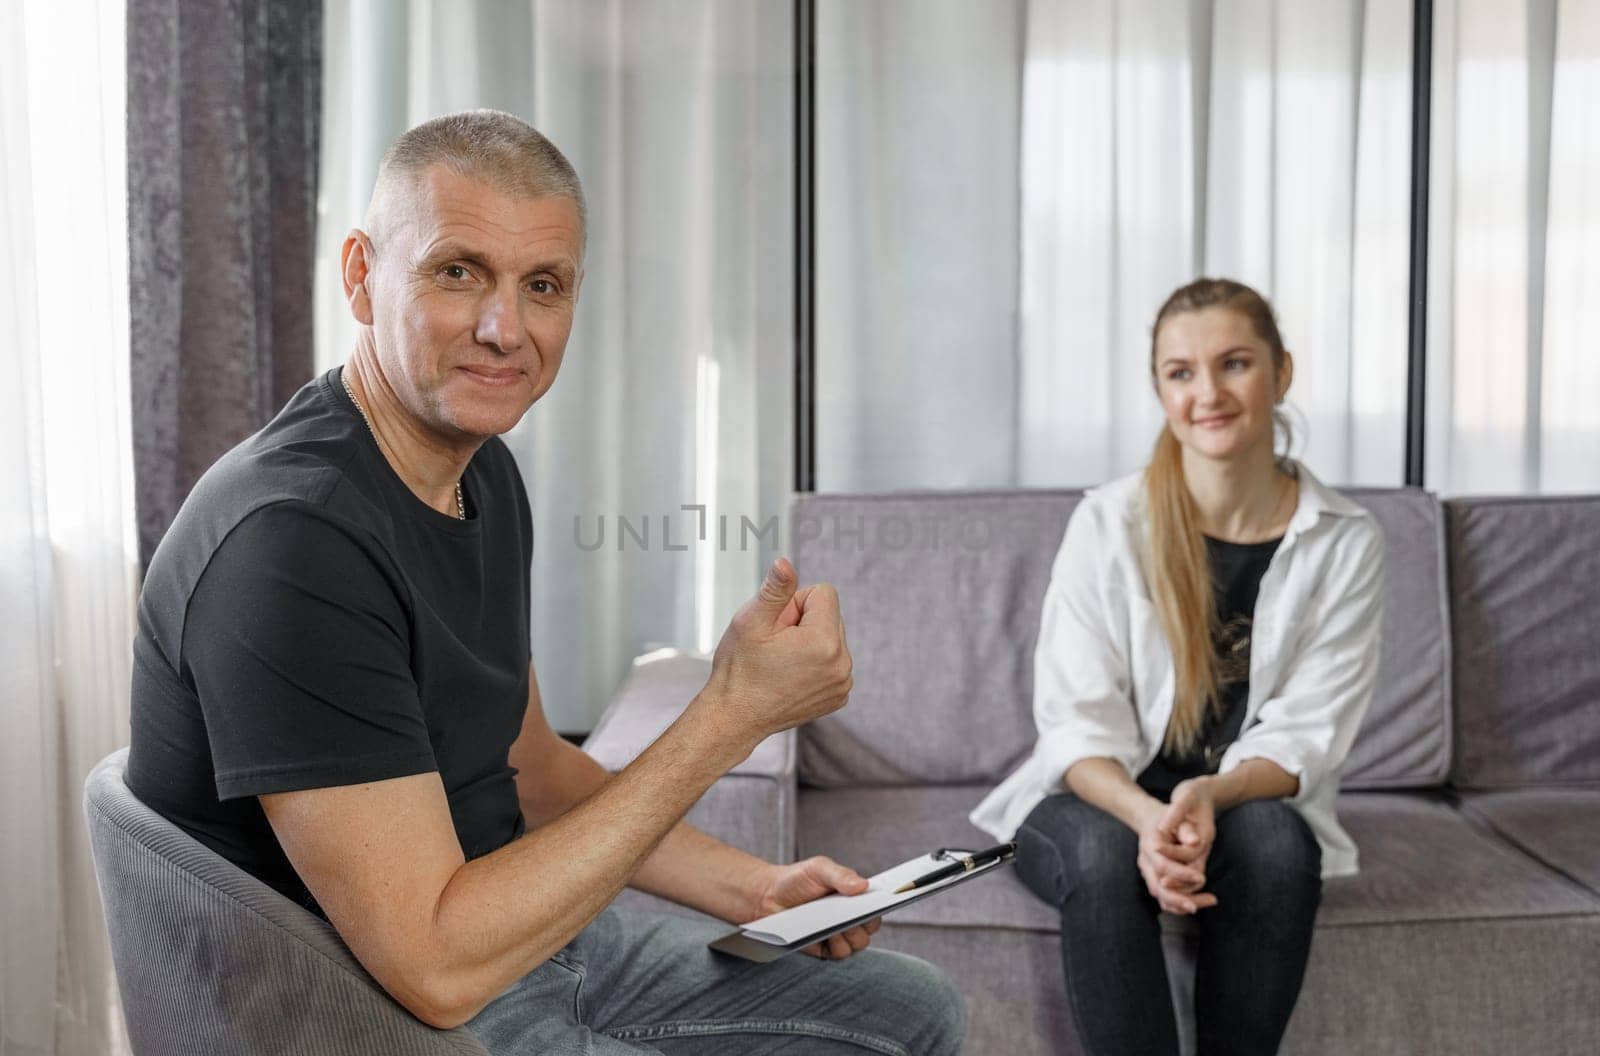 A male psychologist conducts a consultation, as a result of which the female client is satisfied with the result. He shows a hand gesture - class, excellent.